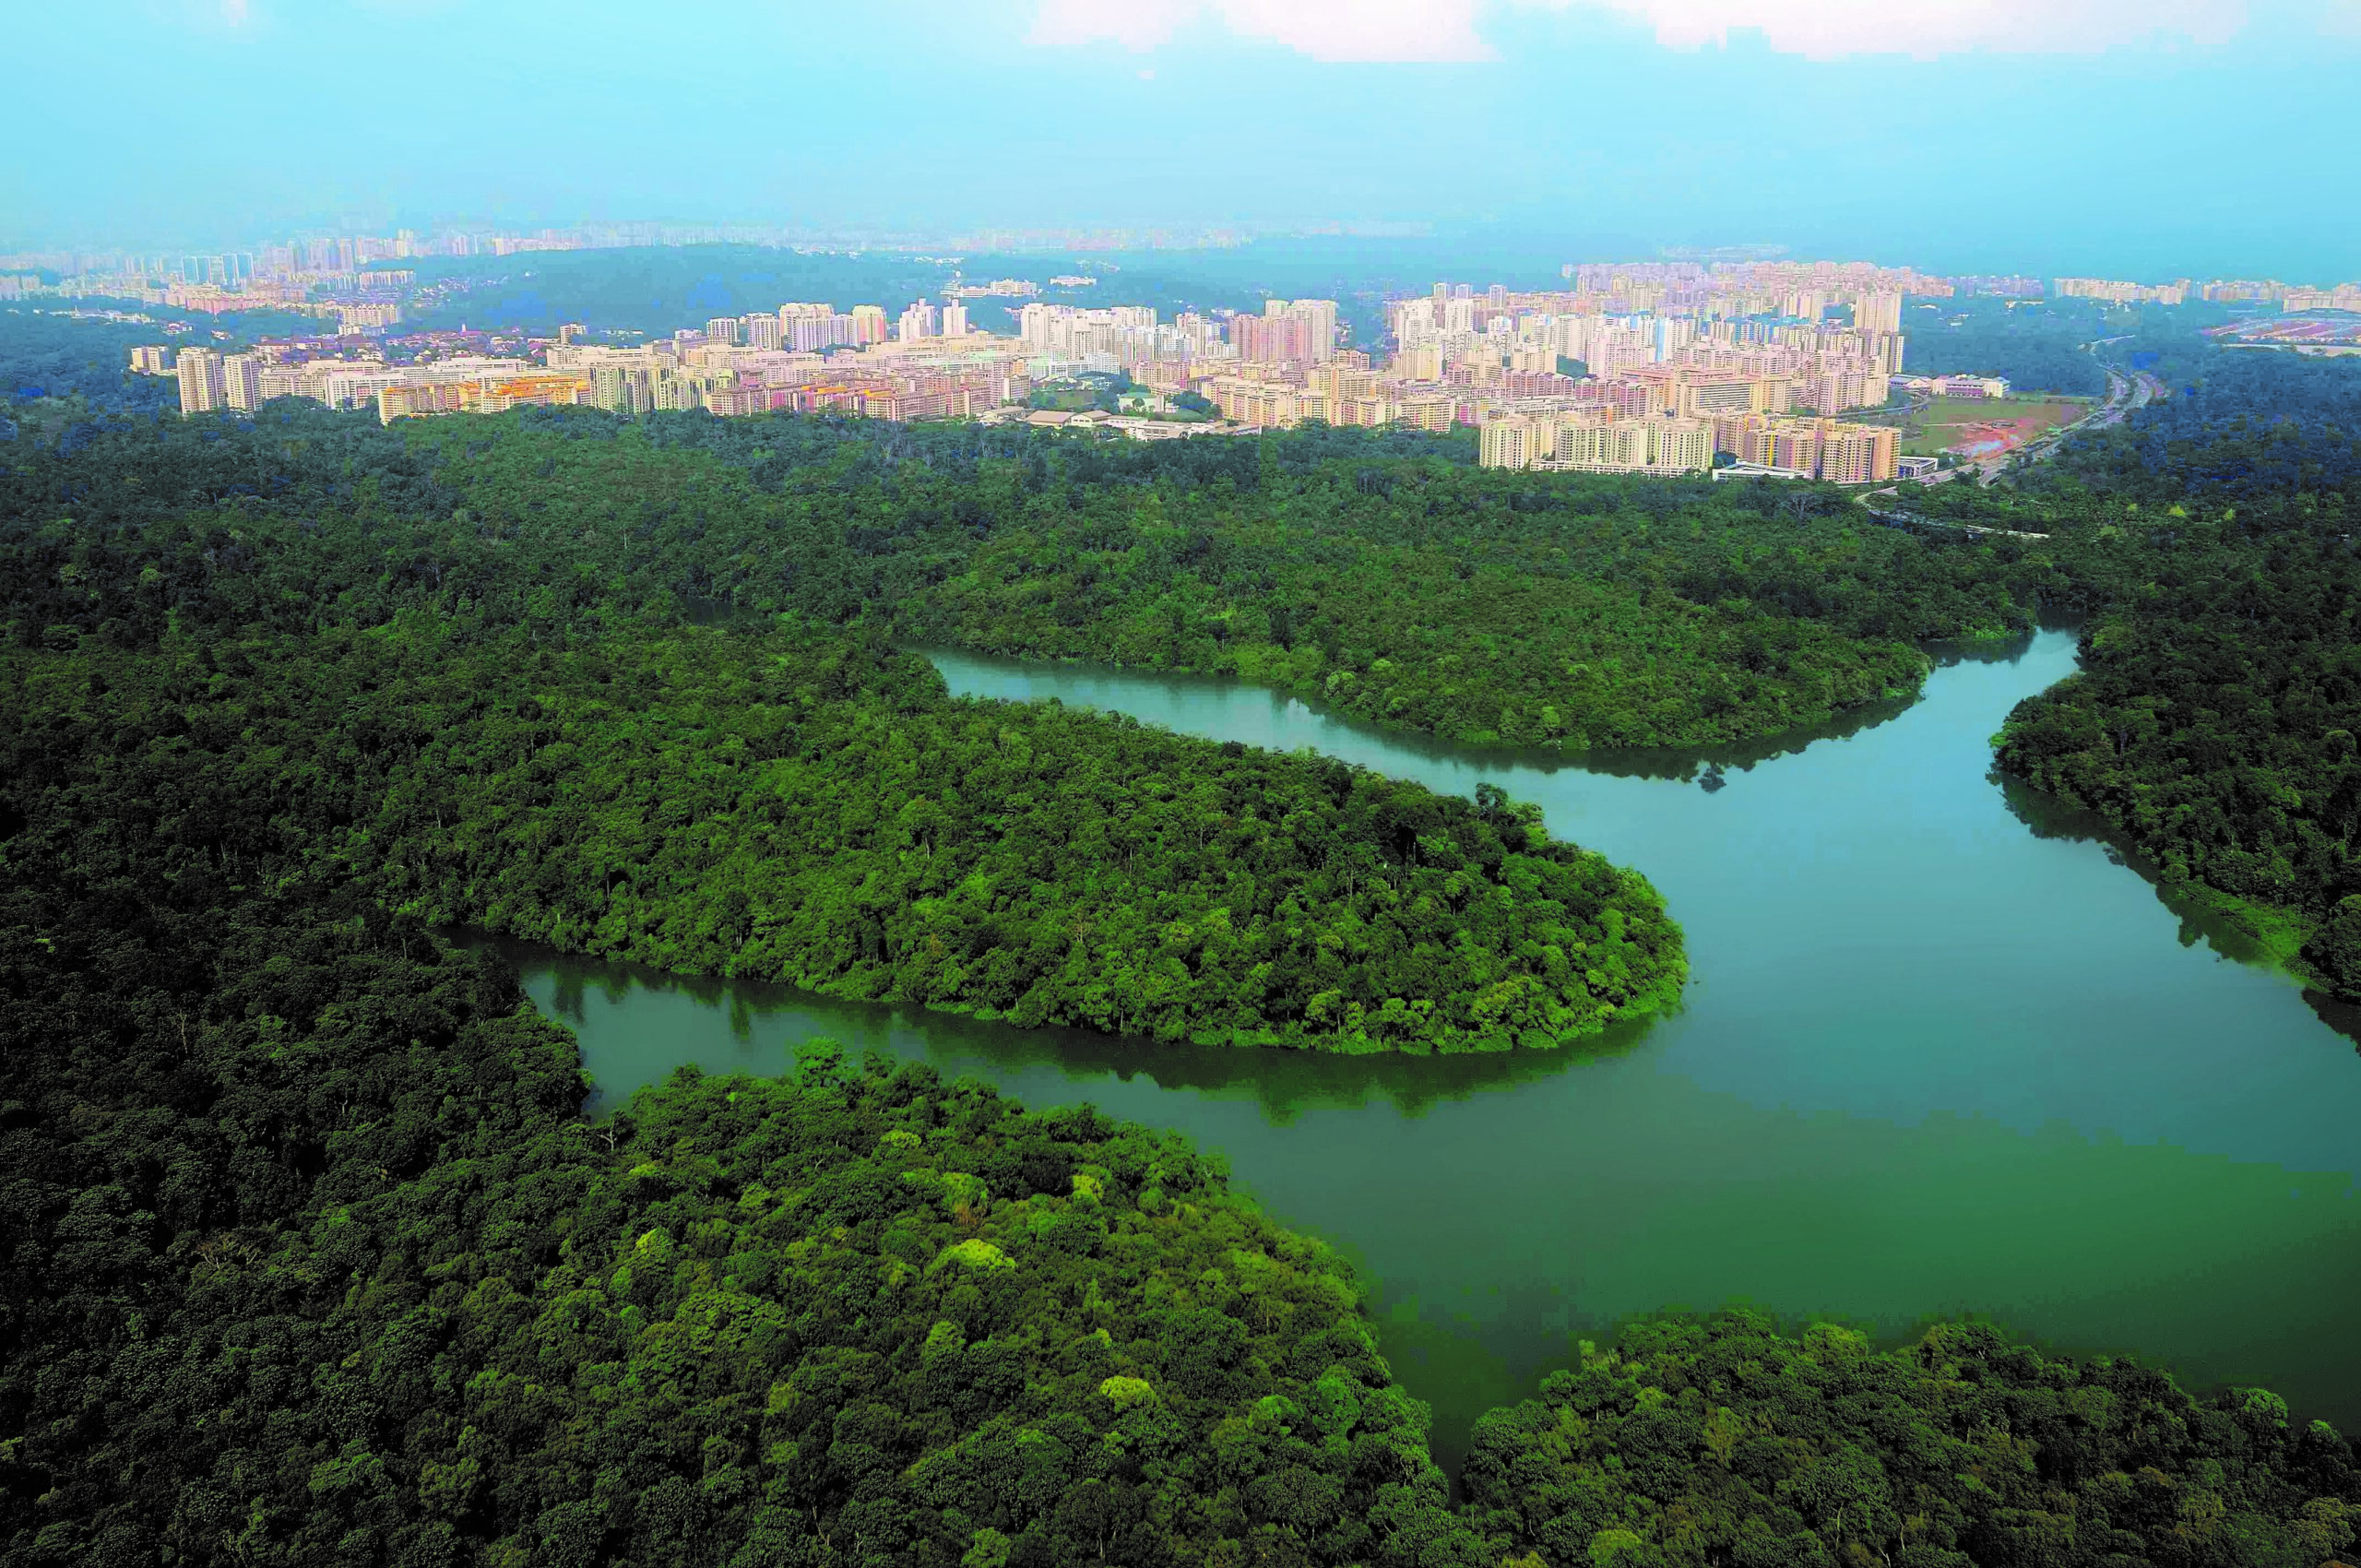 A photograph of the Central Catchment Nature Reserve, home to the Keli bladefin catfish, the only Critically Endangered freshwater fish species in Singapore.